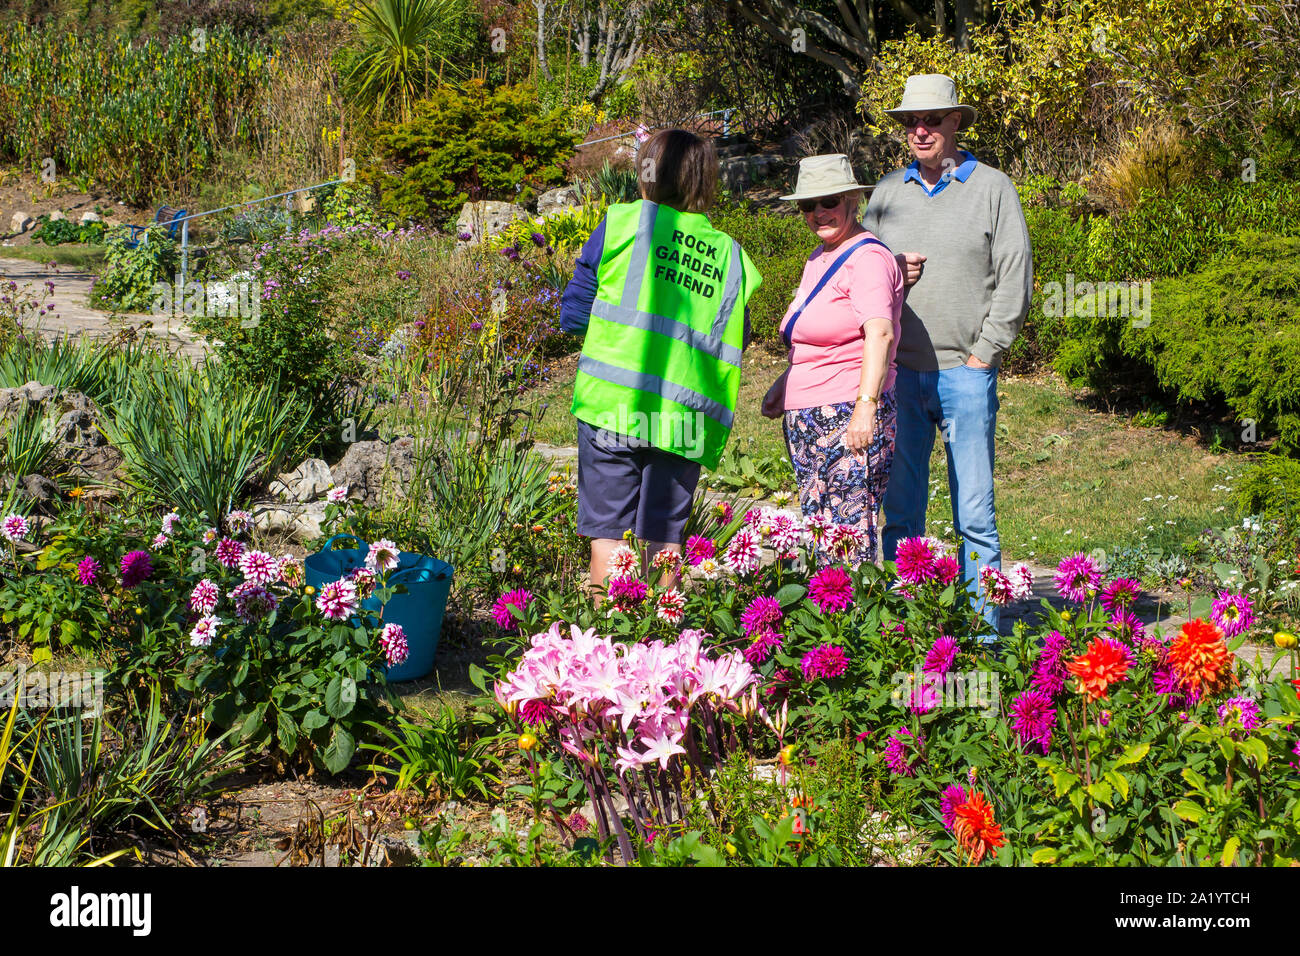 18 September 2019 A Rock Garden Friend talking to visitors in the Portsmouth Rock Garden on a hot early autumn day in September Stock Photo